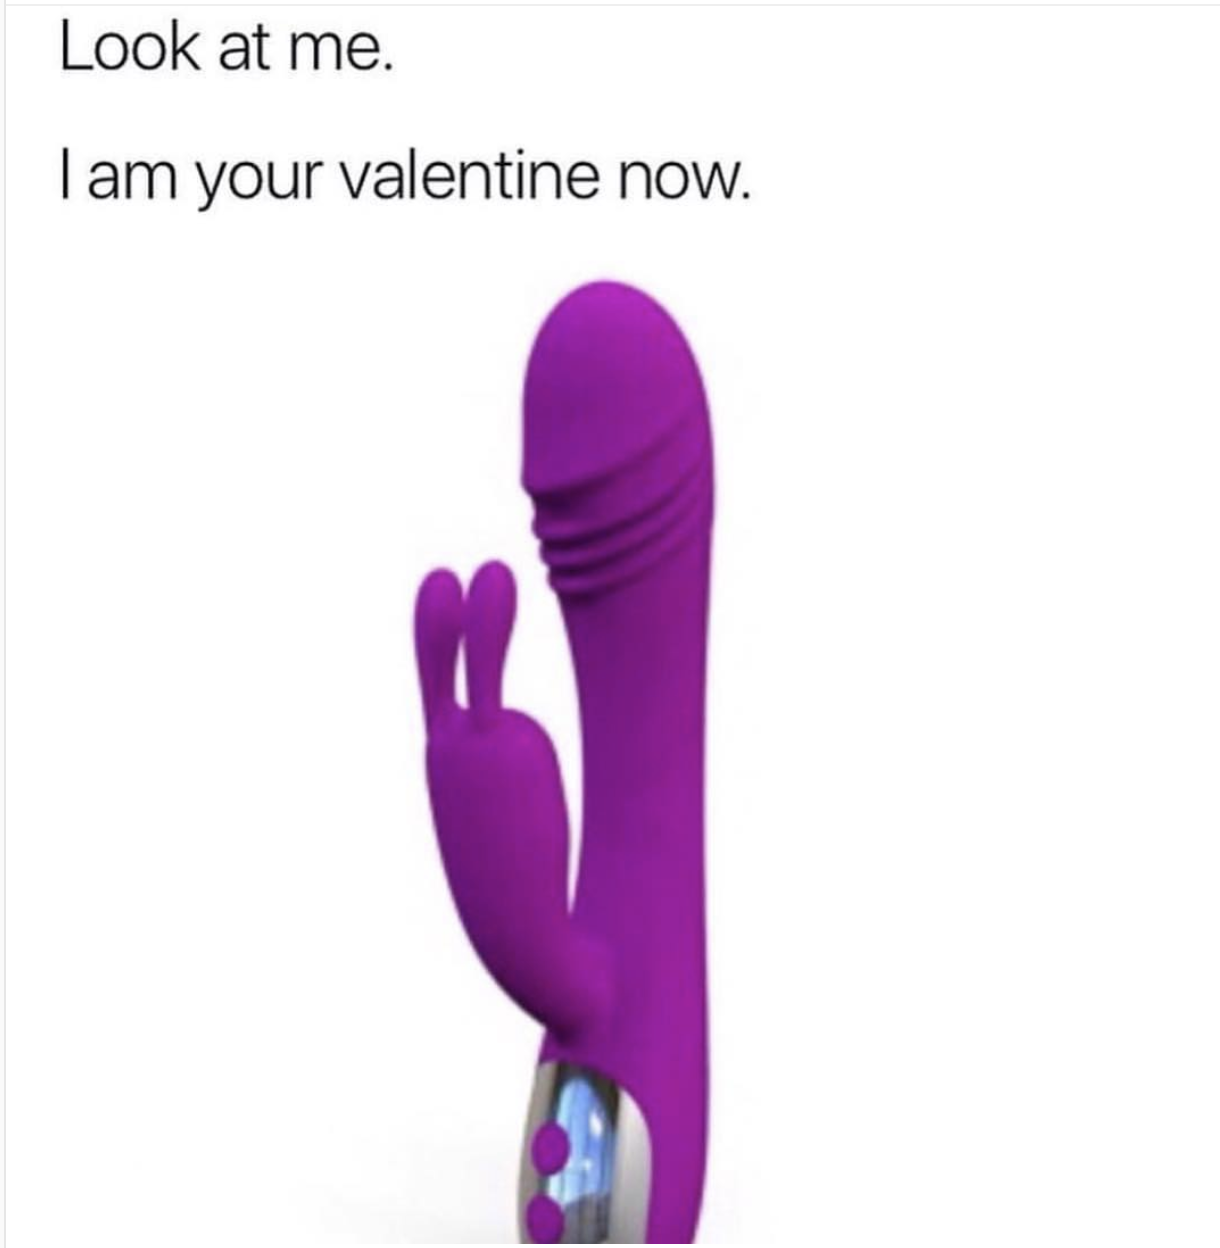 erotic - Look at me. I am your valentine now.